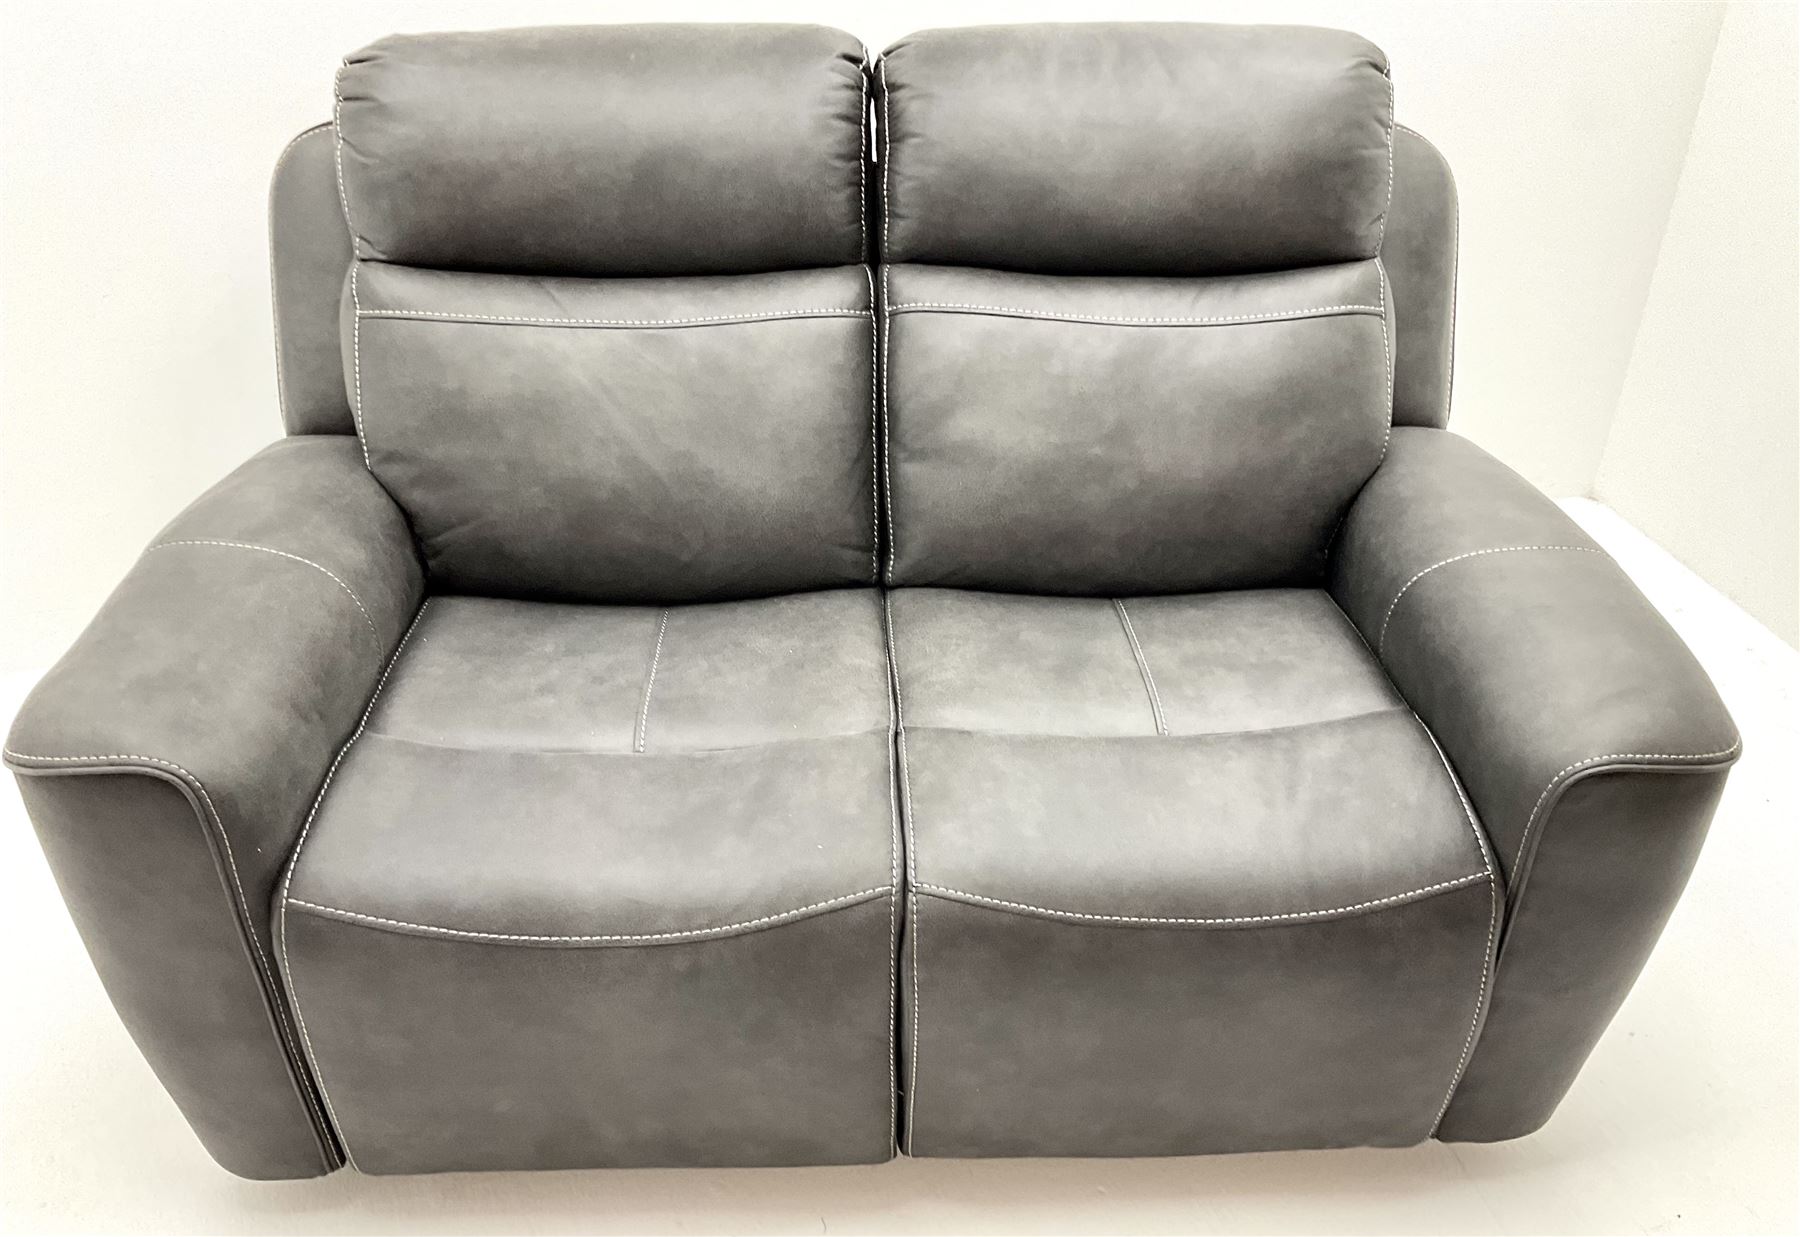 Pair of two seat electric reclining sofas - Image 5 of 6